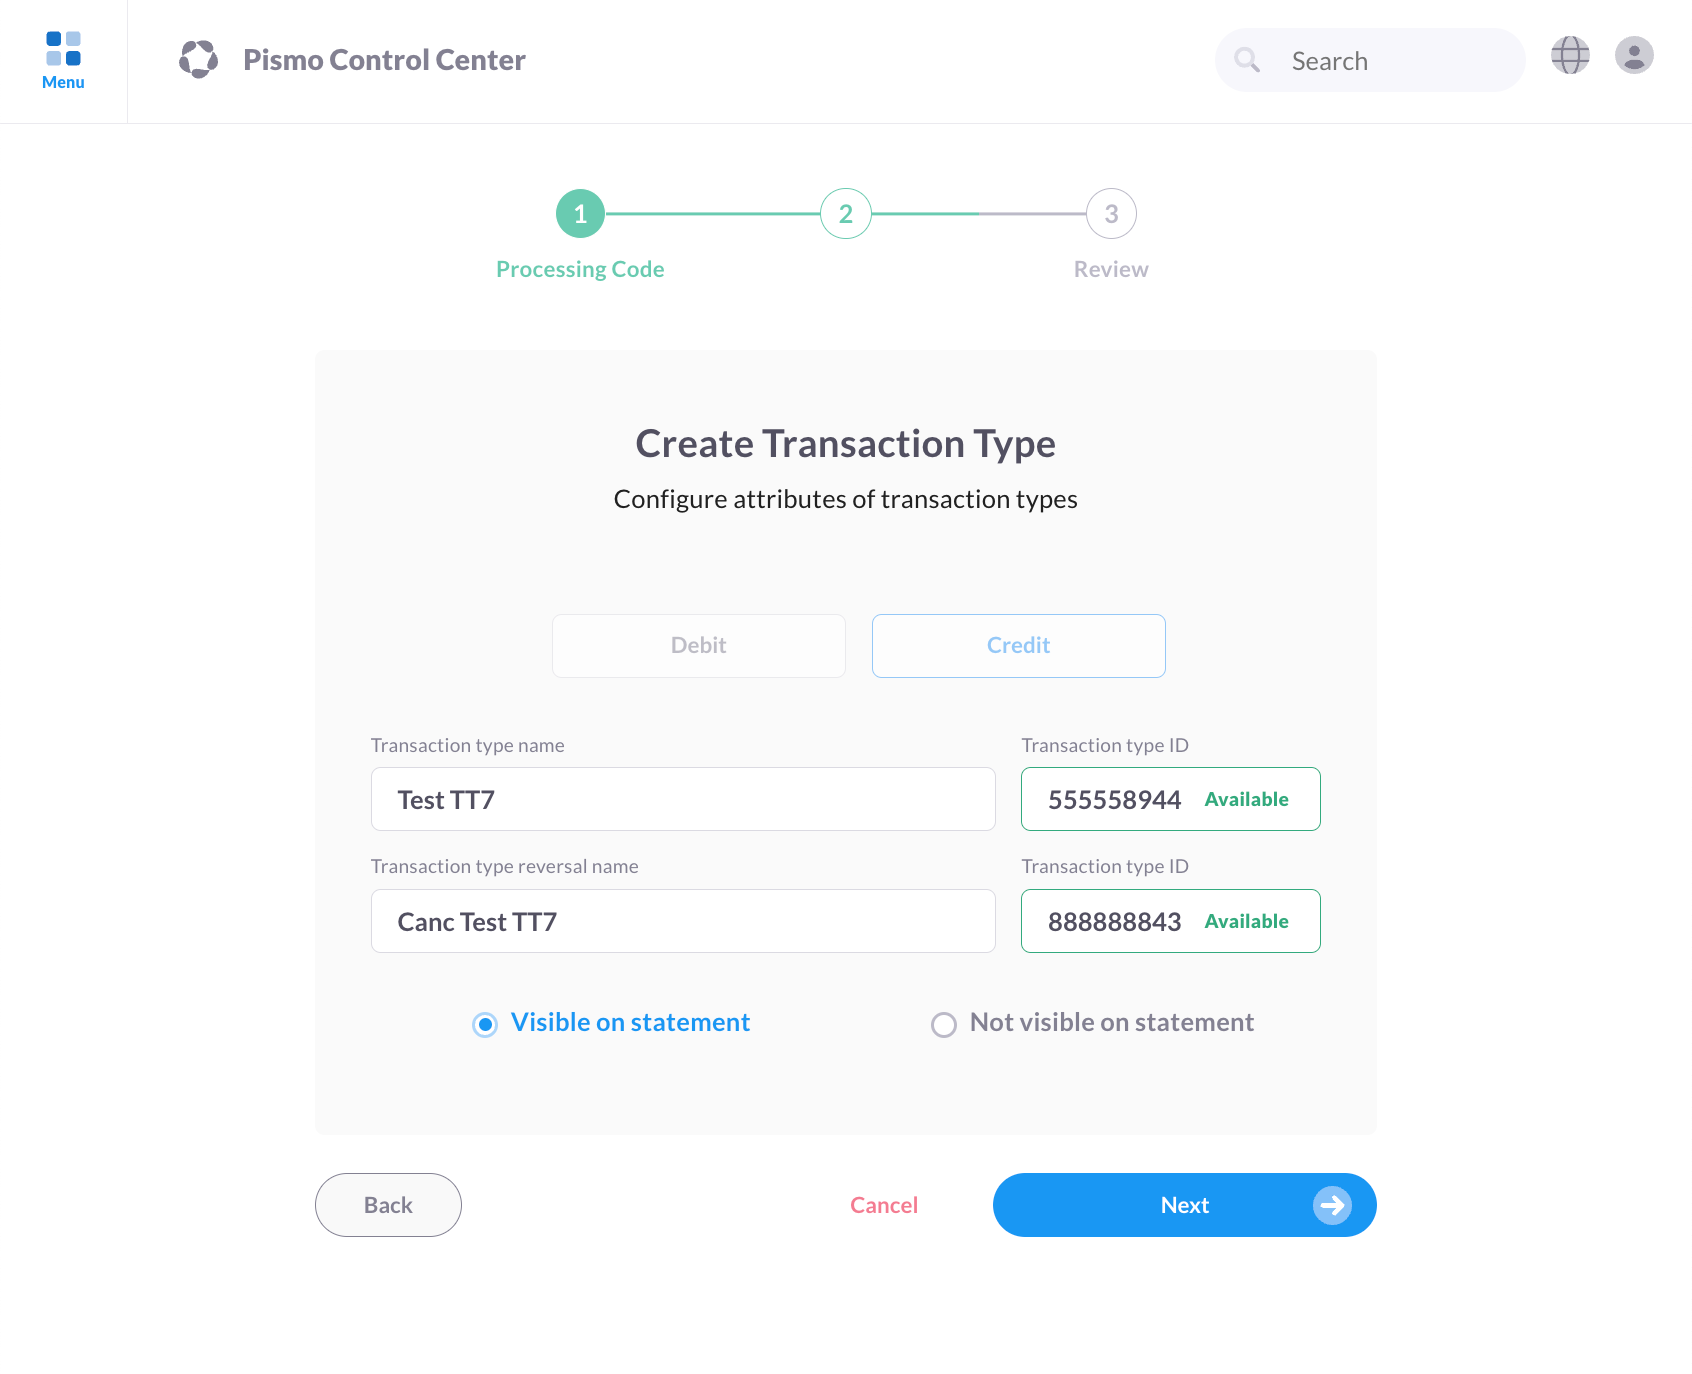 Screen capture of the Create Transaction Type section of the Control Center.